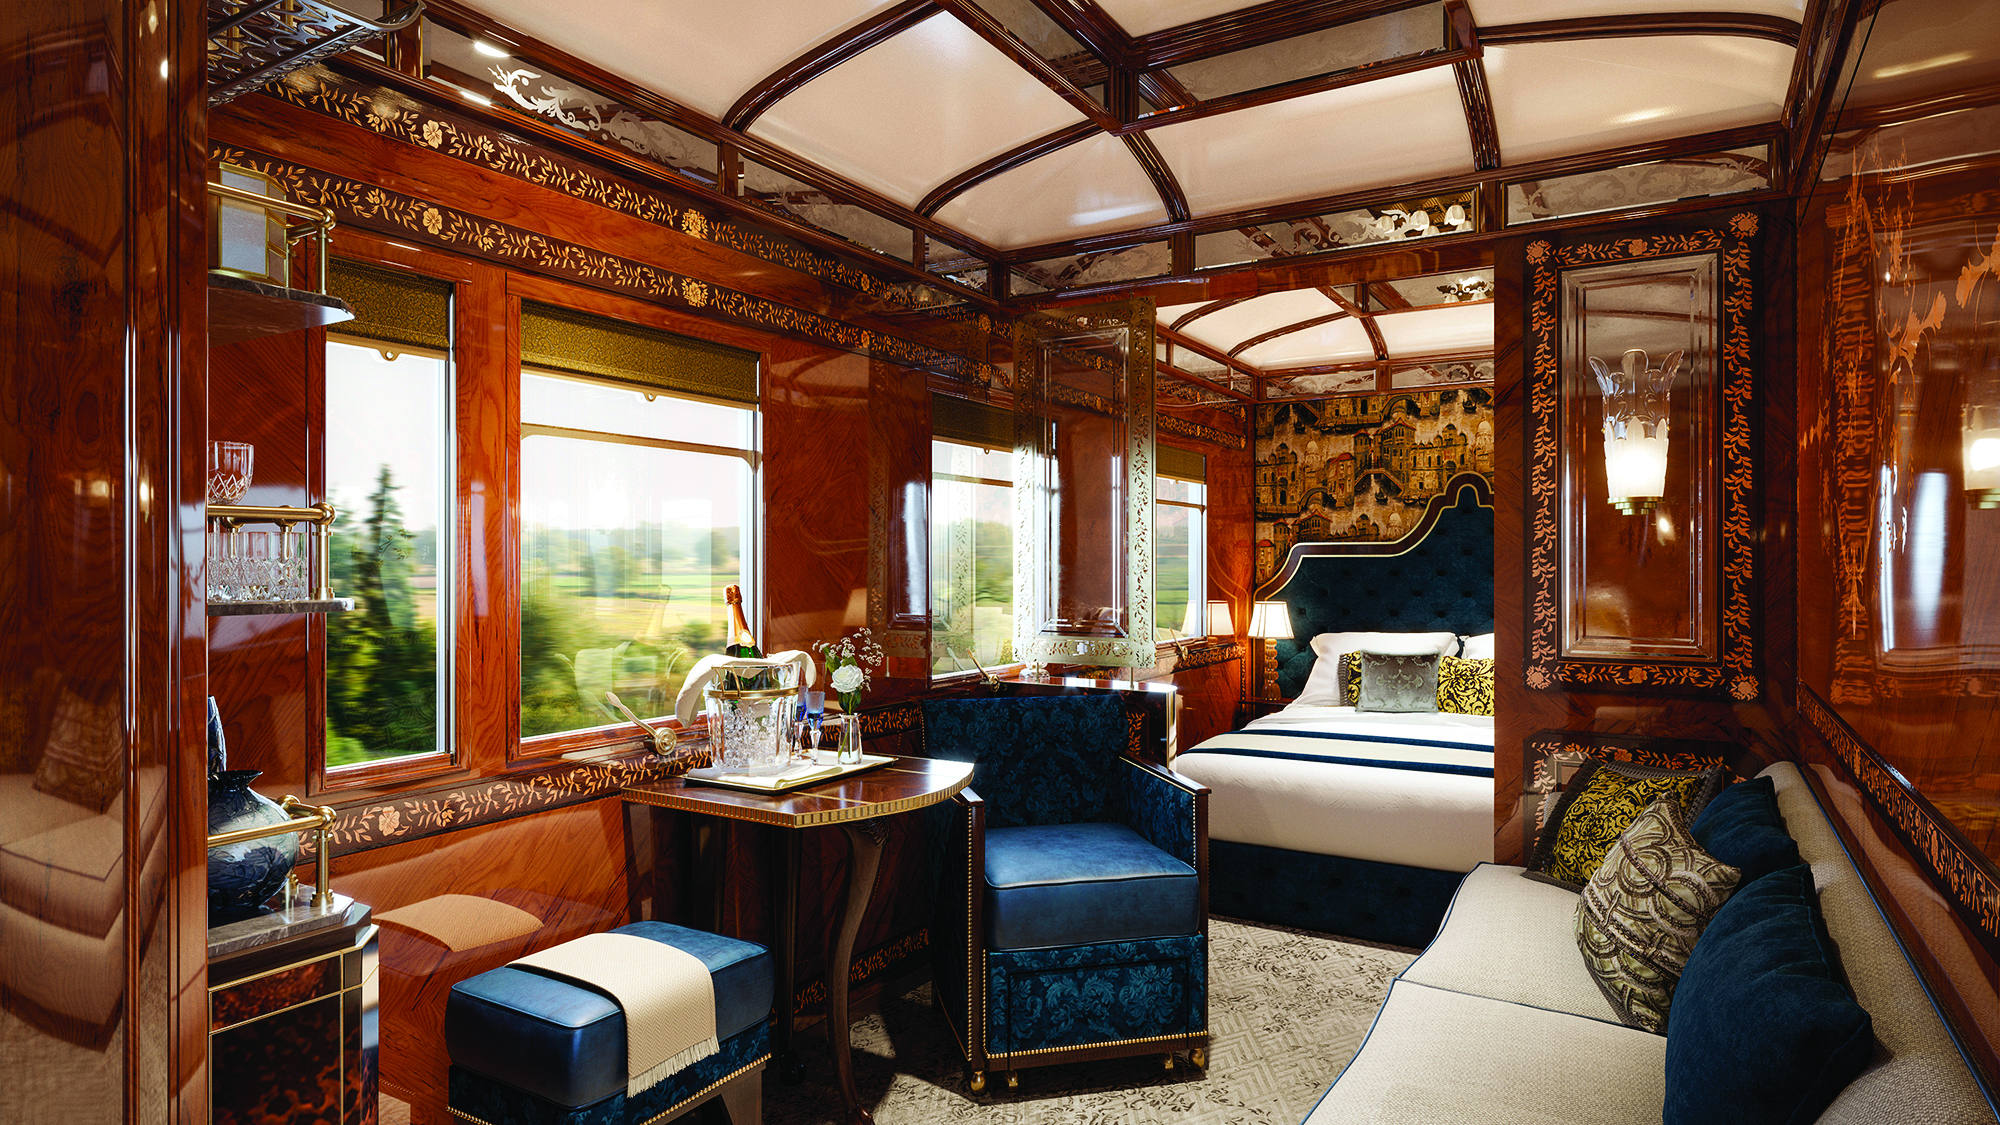 Does the Orient Express Live Up to Its Glamorous Golden-Age